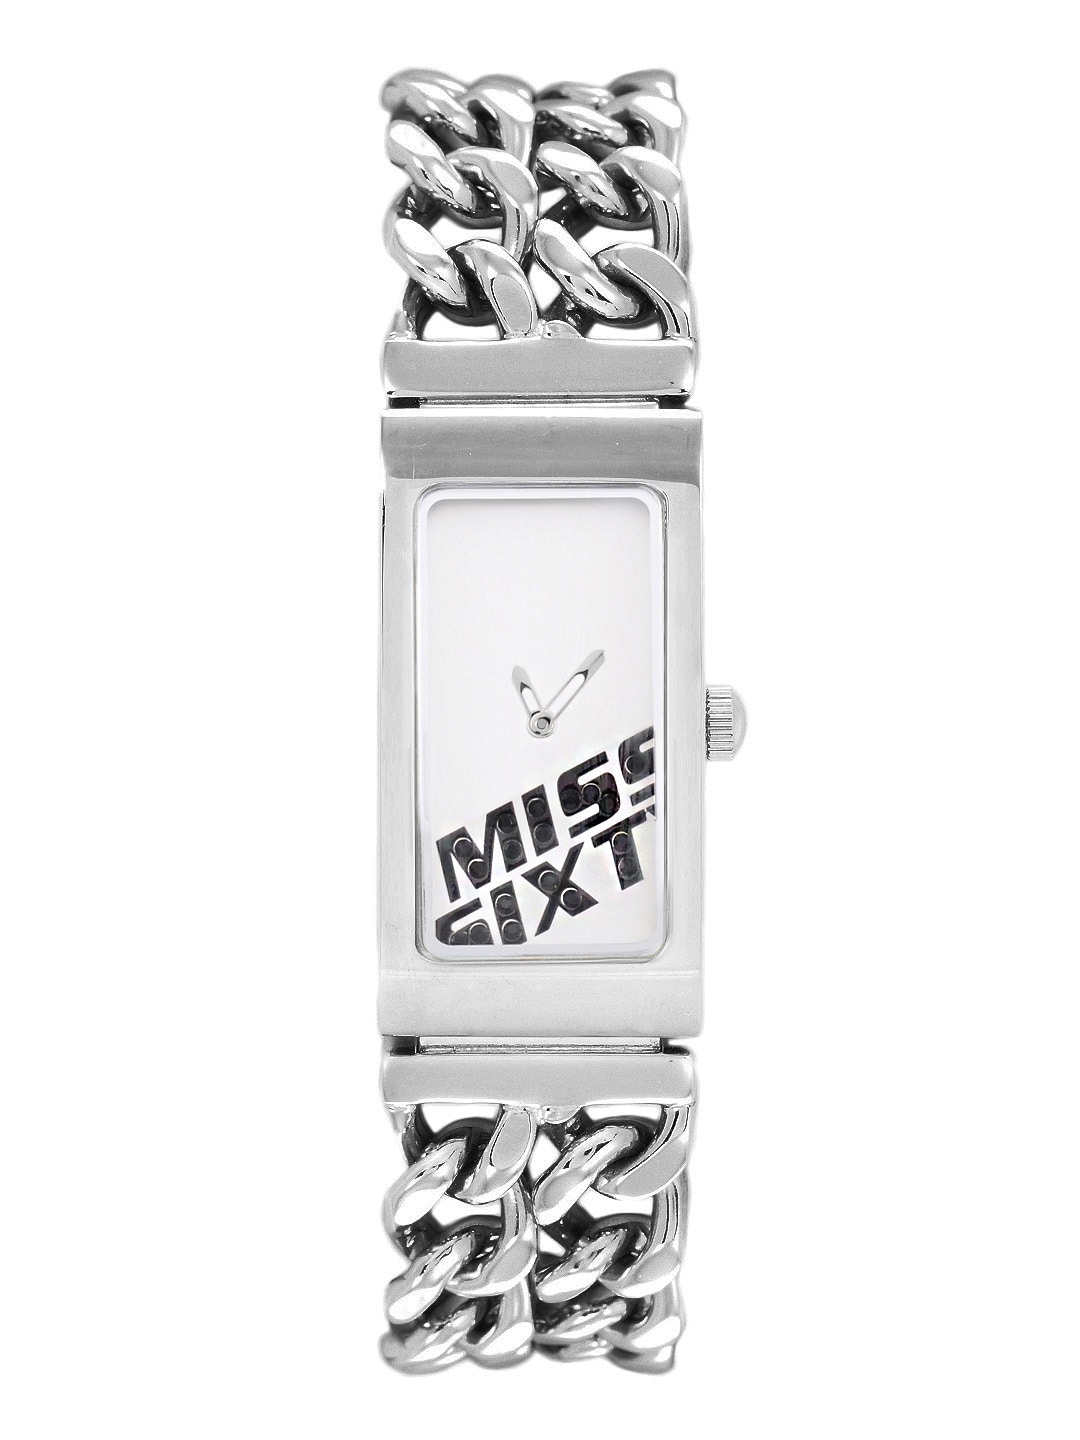 Miss Sixty Silver Dial Watch